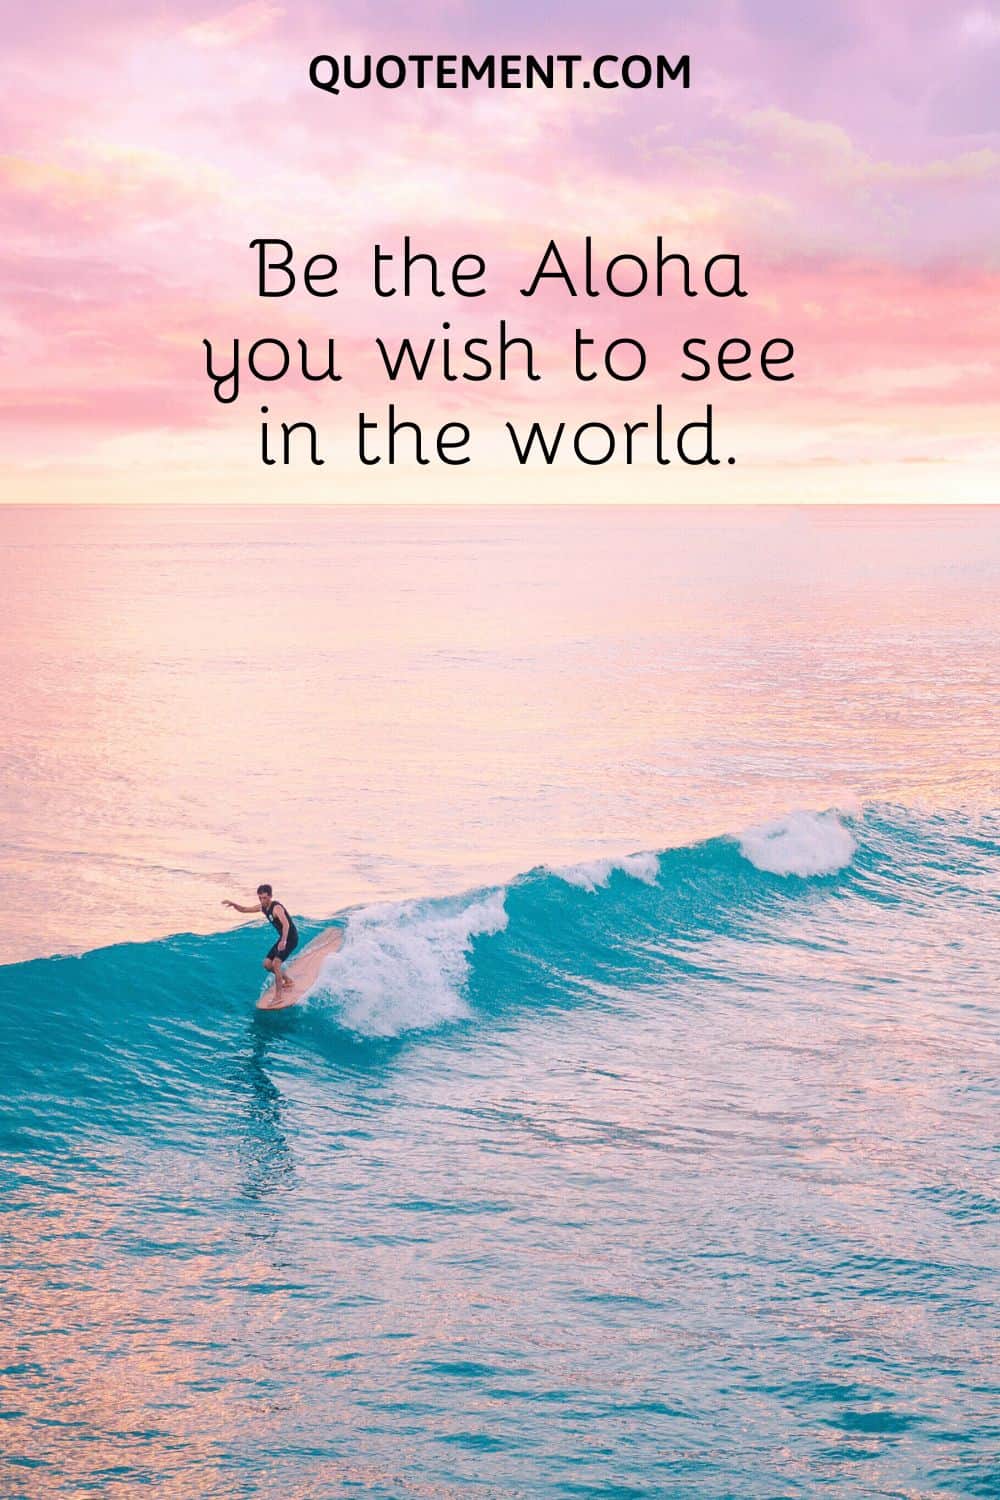 Be the Aloha you wish to see in the world.